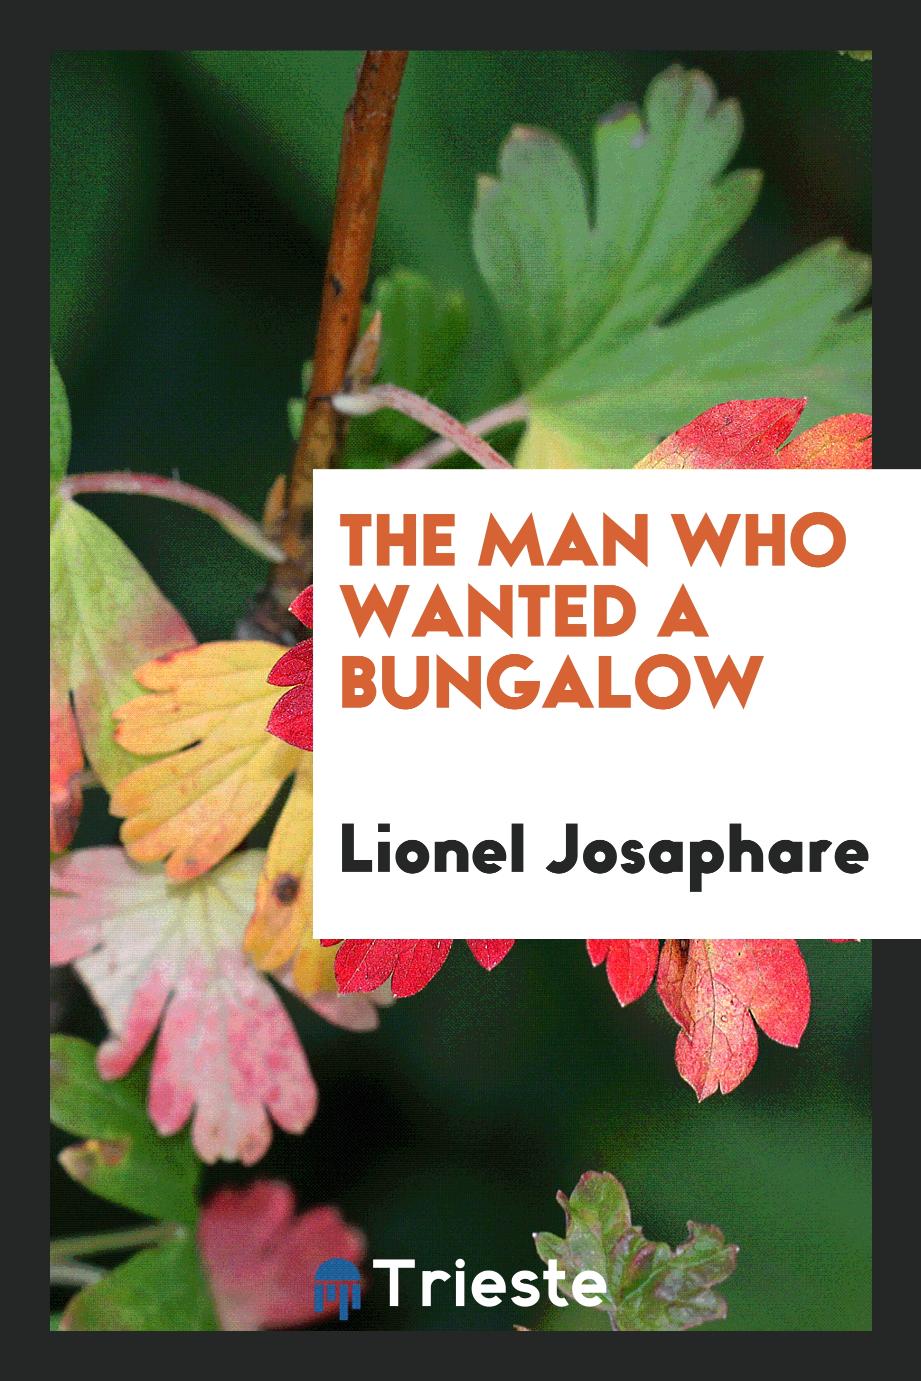 The Man Who Wanted a Bungalow